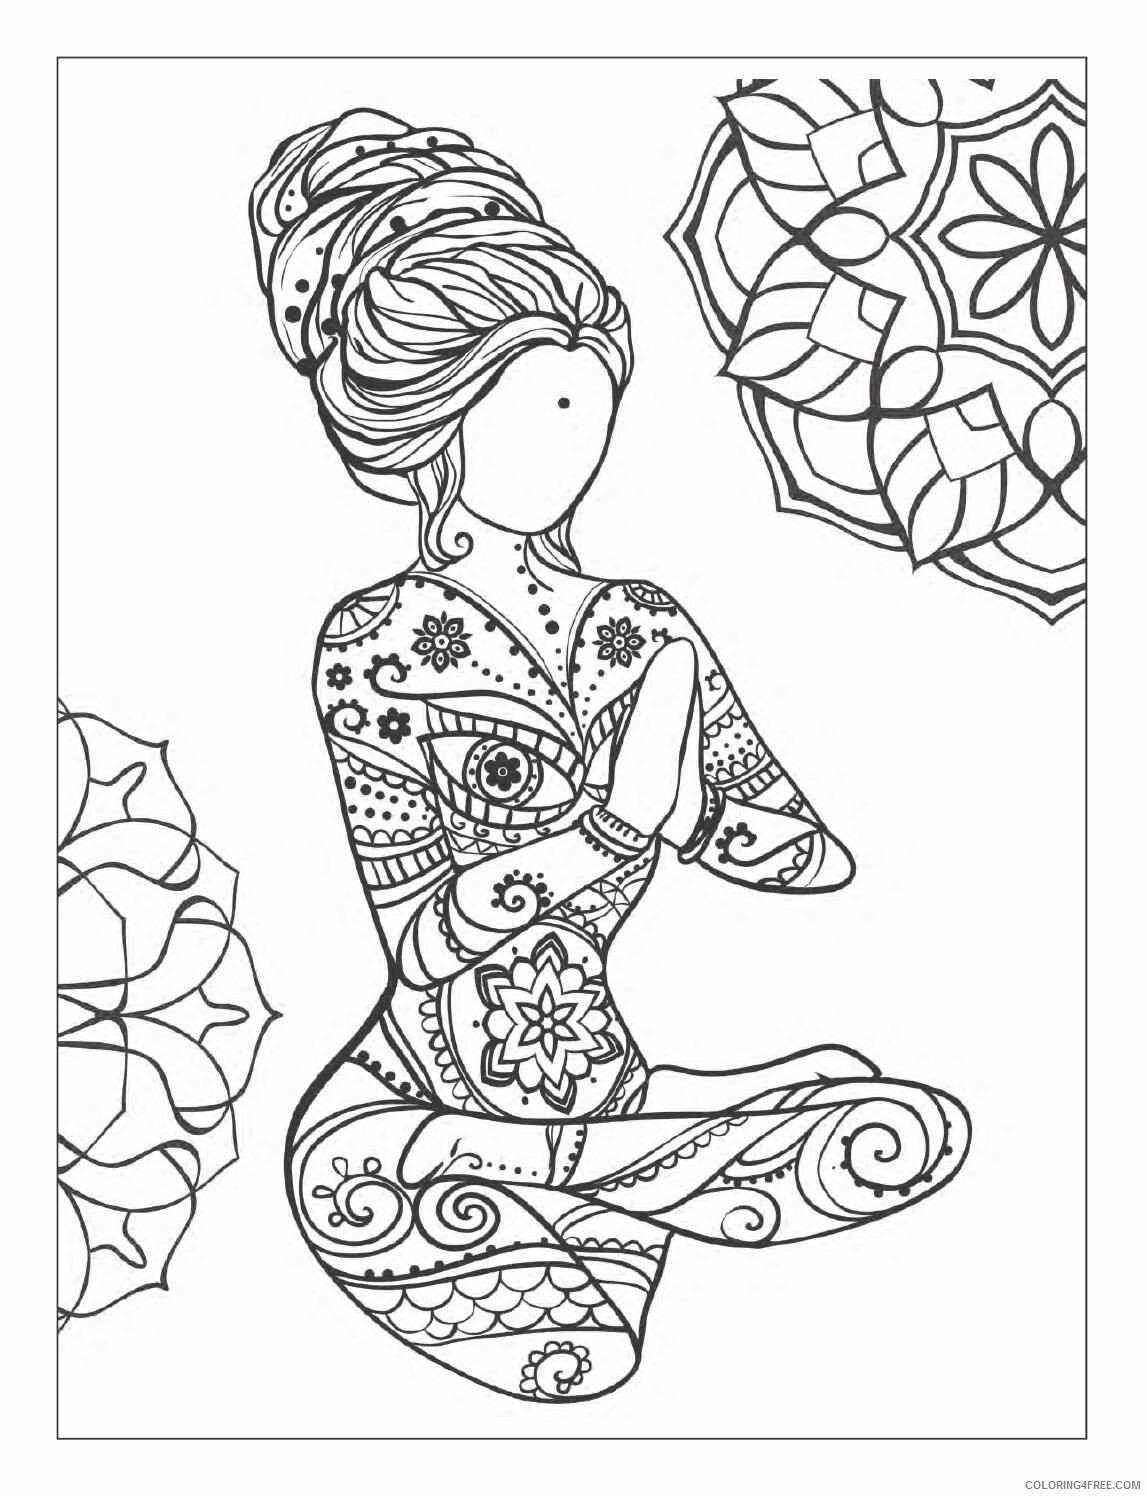 Mindfulness Coloring Pages Adult Mindfulness Yoga Meditation Printable 2020 664 Coloring4free